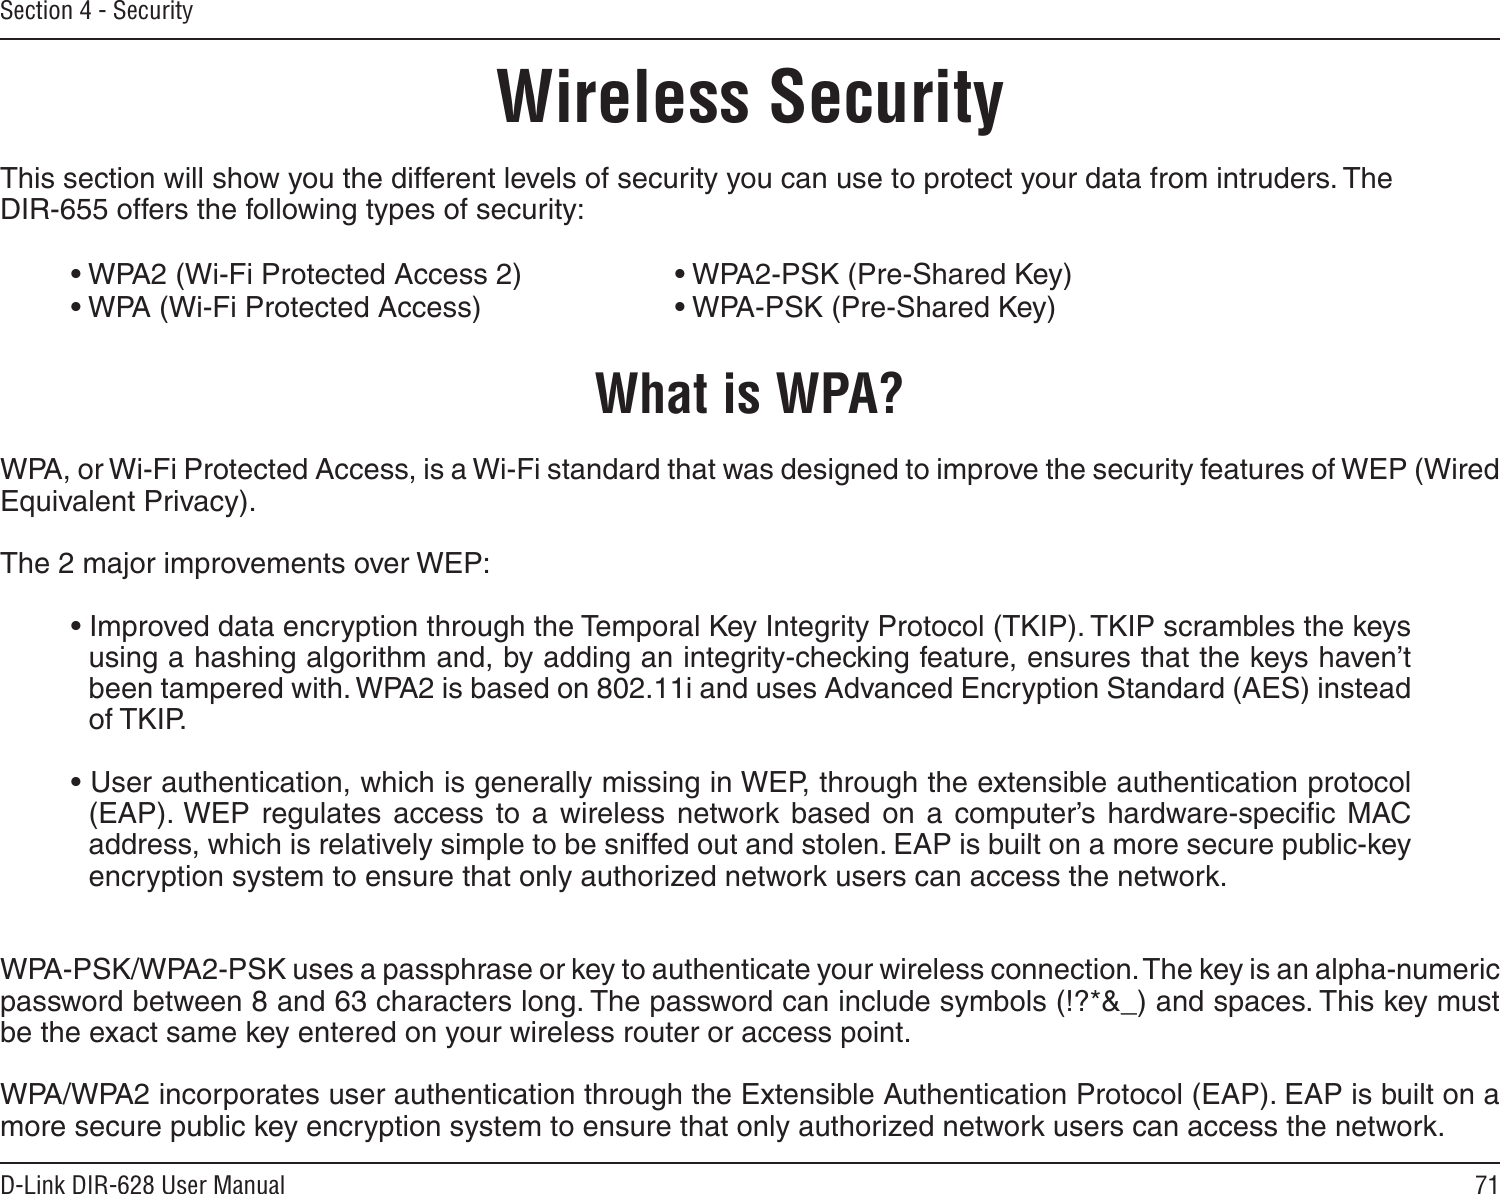 71D-Link DIR-628 User ManualSection 4 - SecurityWireless SecurityThis section will show you the different levels of security you can use to protect your data from intruders. The DIR-655 offers the following types of security:• WPA2 (Wi-Fi Protected Access 2)     • WPA2-PSK (Pre-Shared Key)• WPA (Wi-Fi Protected Access)      • WPA-PSK (Pre-Shared Key)What is WPA?WPA, or Wi-Fi Protected Access, is a Wi-Fi standard that was designed to improve the security features of WEP (Wired Equivalent Privacy).  The 2 major improvements over WEP: • Improved data encryption through the Temporal Key Integrity Protocol (TKIP). TKIP scrambles the keys using a hashing algorithm and, by adding an integrity-checking feature, ensures that the keys haven’t been tampered with. WPA2 is based on 802.11i and uses Advanced Encryption Standard (AES) instead of TKIP.• User authentication, which is generally missing in WEP, through the extensible authentication protocol (EAP). WEP  regulates  access  to  a  wireless  network  based  on  a  computer’s  hardware-speciﬁc  MAC address, which is relatively simple to be sniffed out and stolen. EAP is built on a more secure public-key encryption system to ensure that only authorized network users can access the network.WPA-PSK/WPA2-PSK uses a passphrase or key to authenticate your wireless connection. The key is an alpha-numeric password between 8 and 63 characters long. The password can include symbols (!?*&amp;_) and spaces. This key must be the exact same key entered on your wireless router or access point.WPA/WPA2 incorporates user authentication through the Extensible Authentication Protocol (EAP). EAP is built on a more secure public key encryption system to ensure that only authorized network users can access the network.